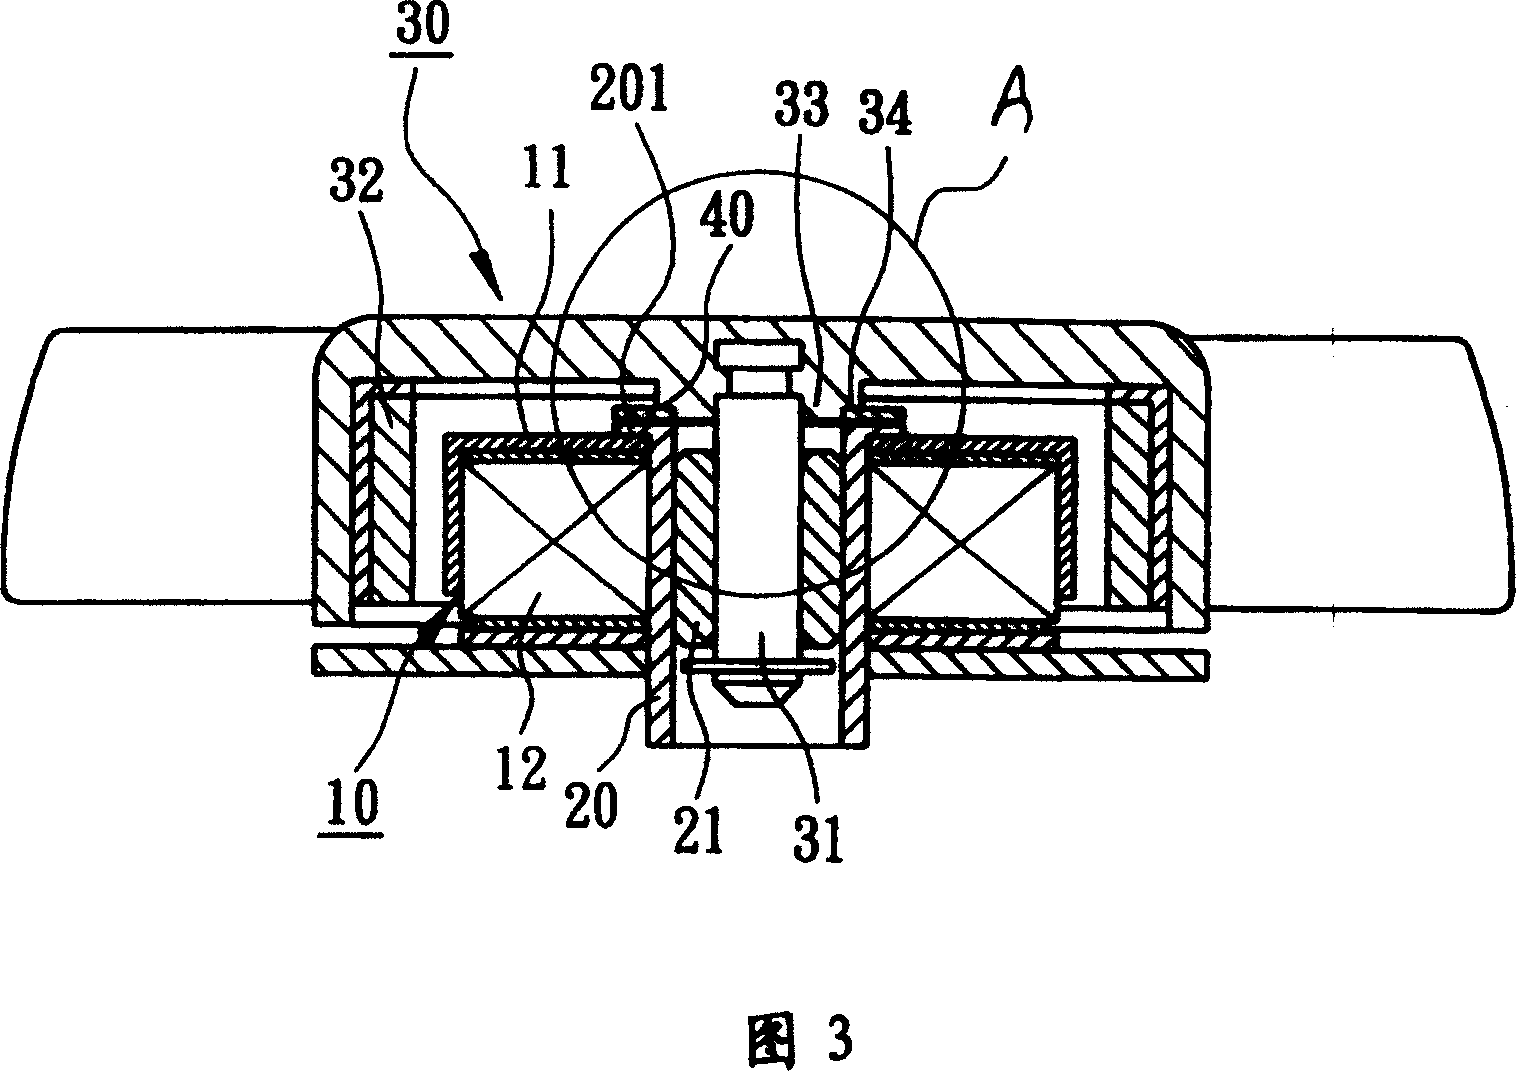 Electromotor of possessing structure for rotational balancing rotor